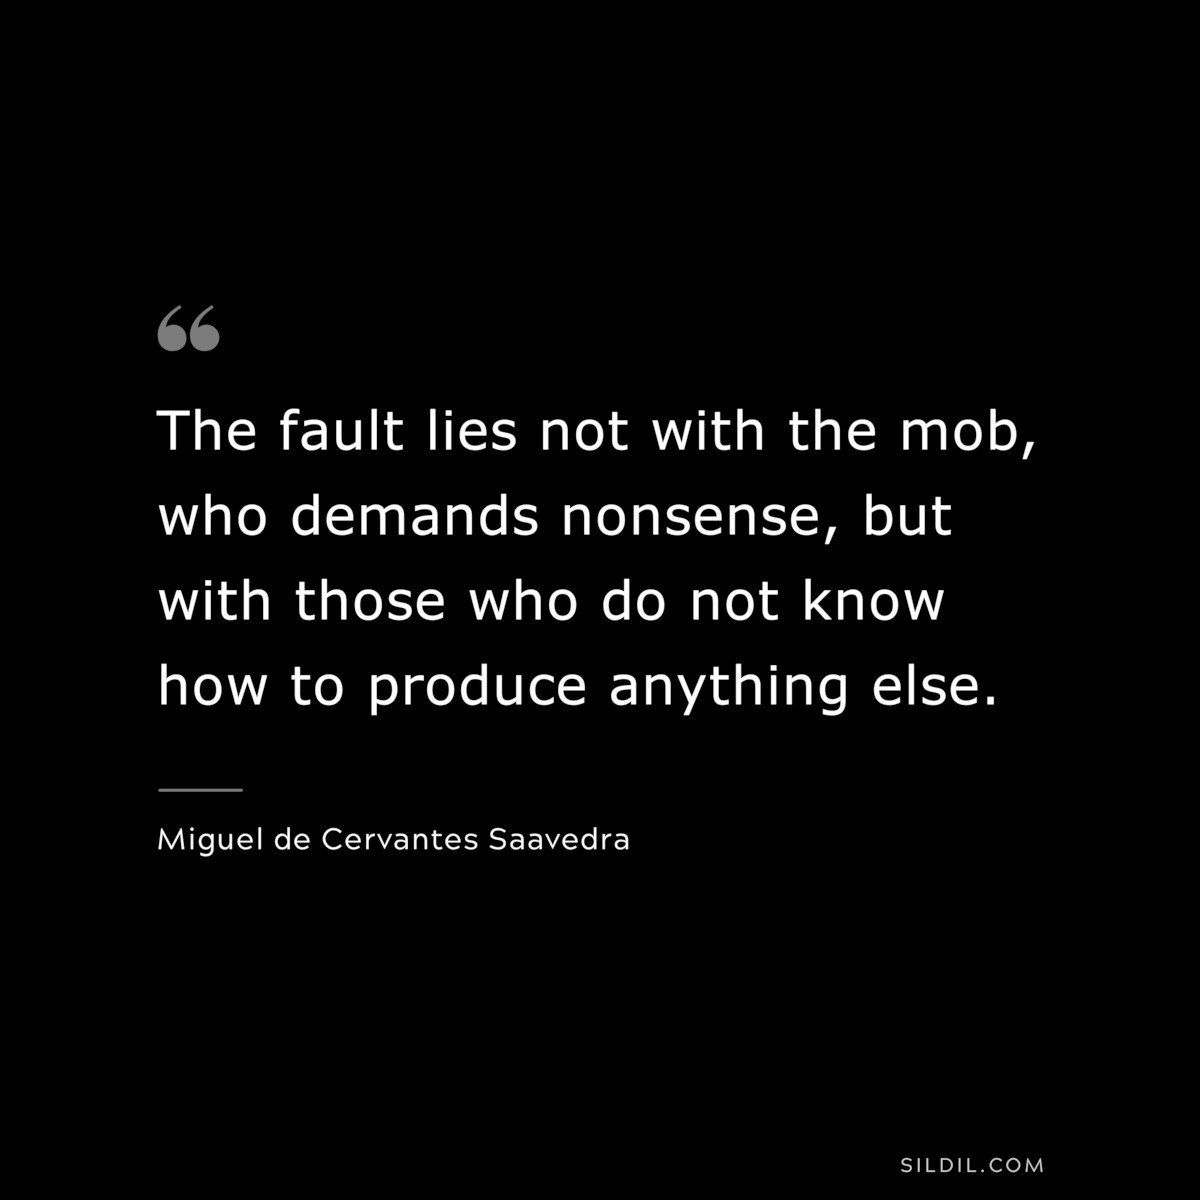 The fault lies not with the mob, who demands nonsense, but with those who do not know how to produce anything else. ― Miguel de Cervantes Saavedra